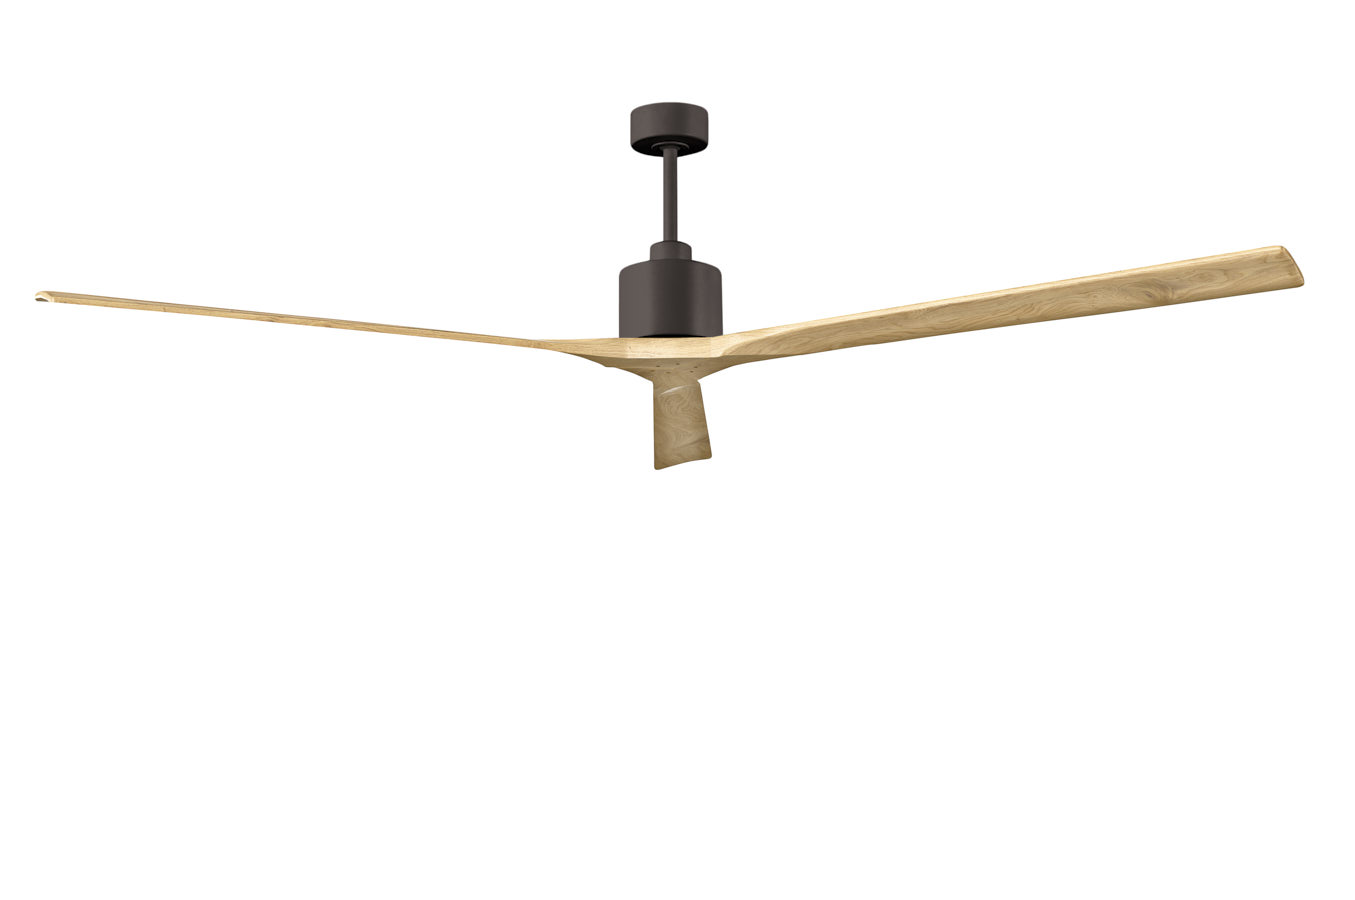 Nan XL ceiling fan in Textured Bronze with 90” Light Maple blades